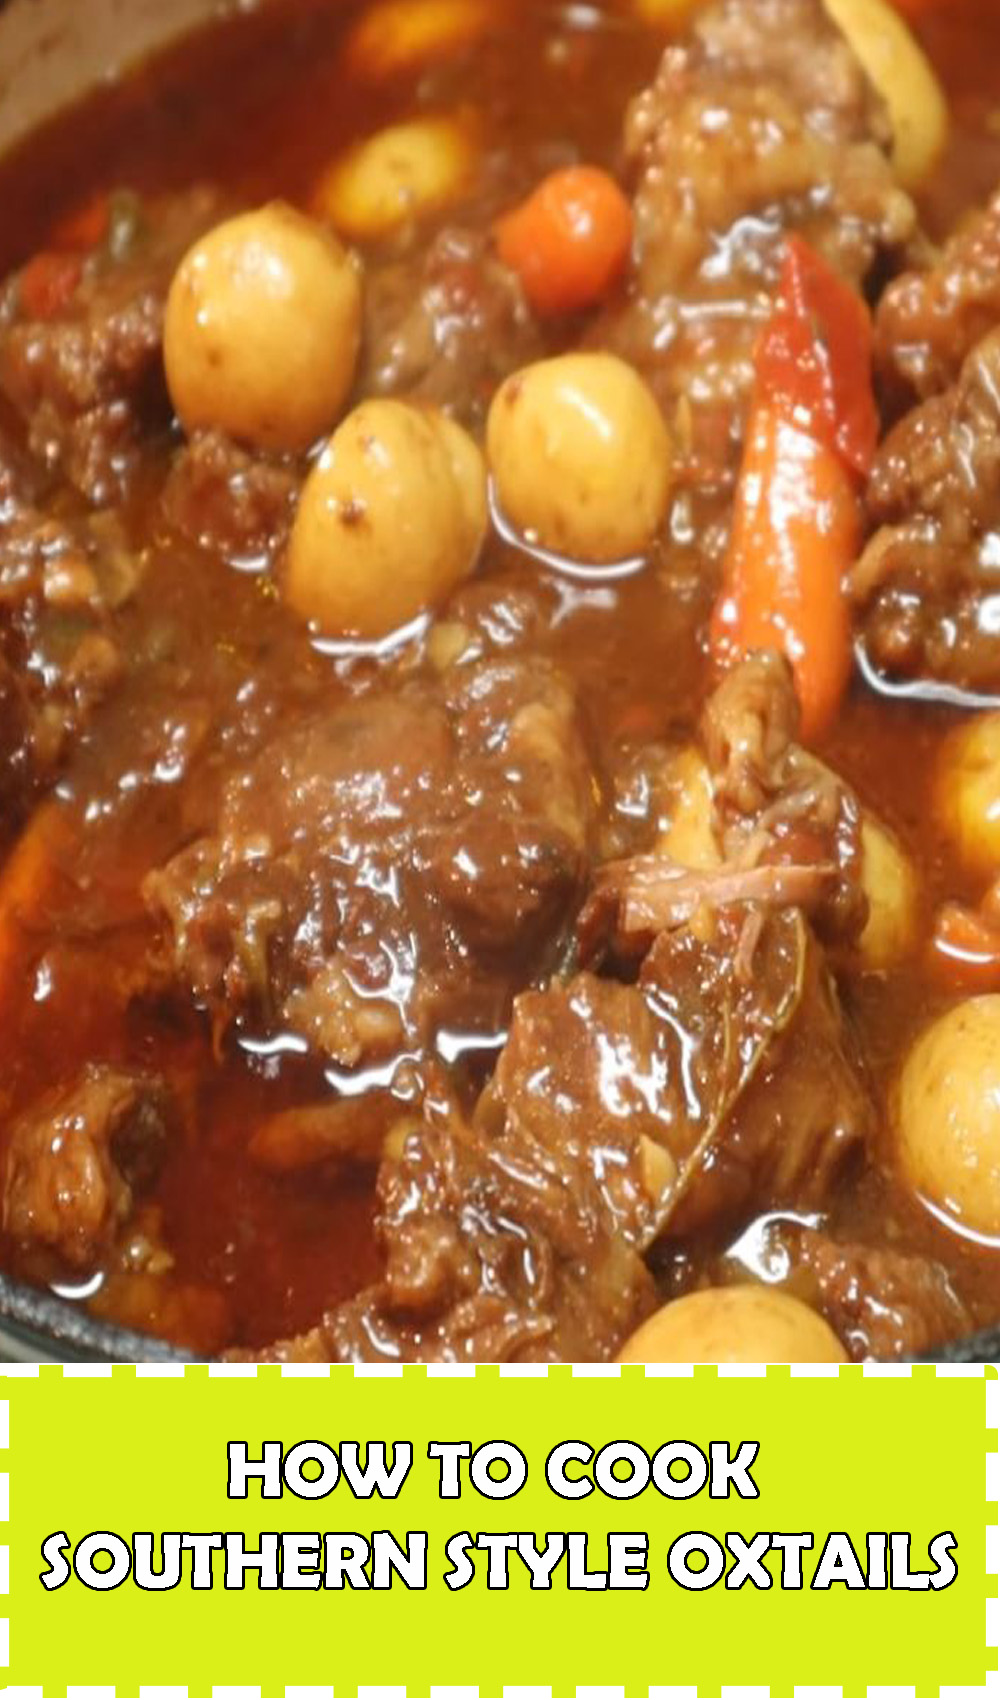 cook southern style oxtails